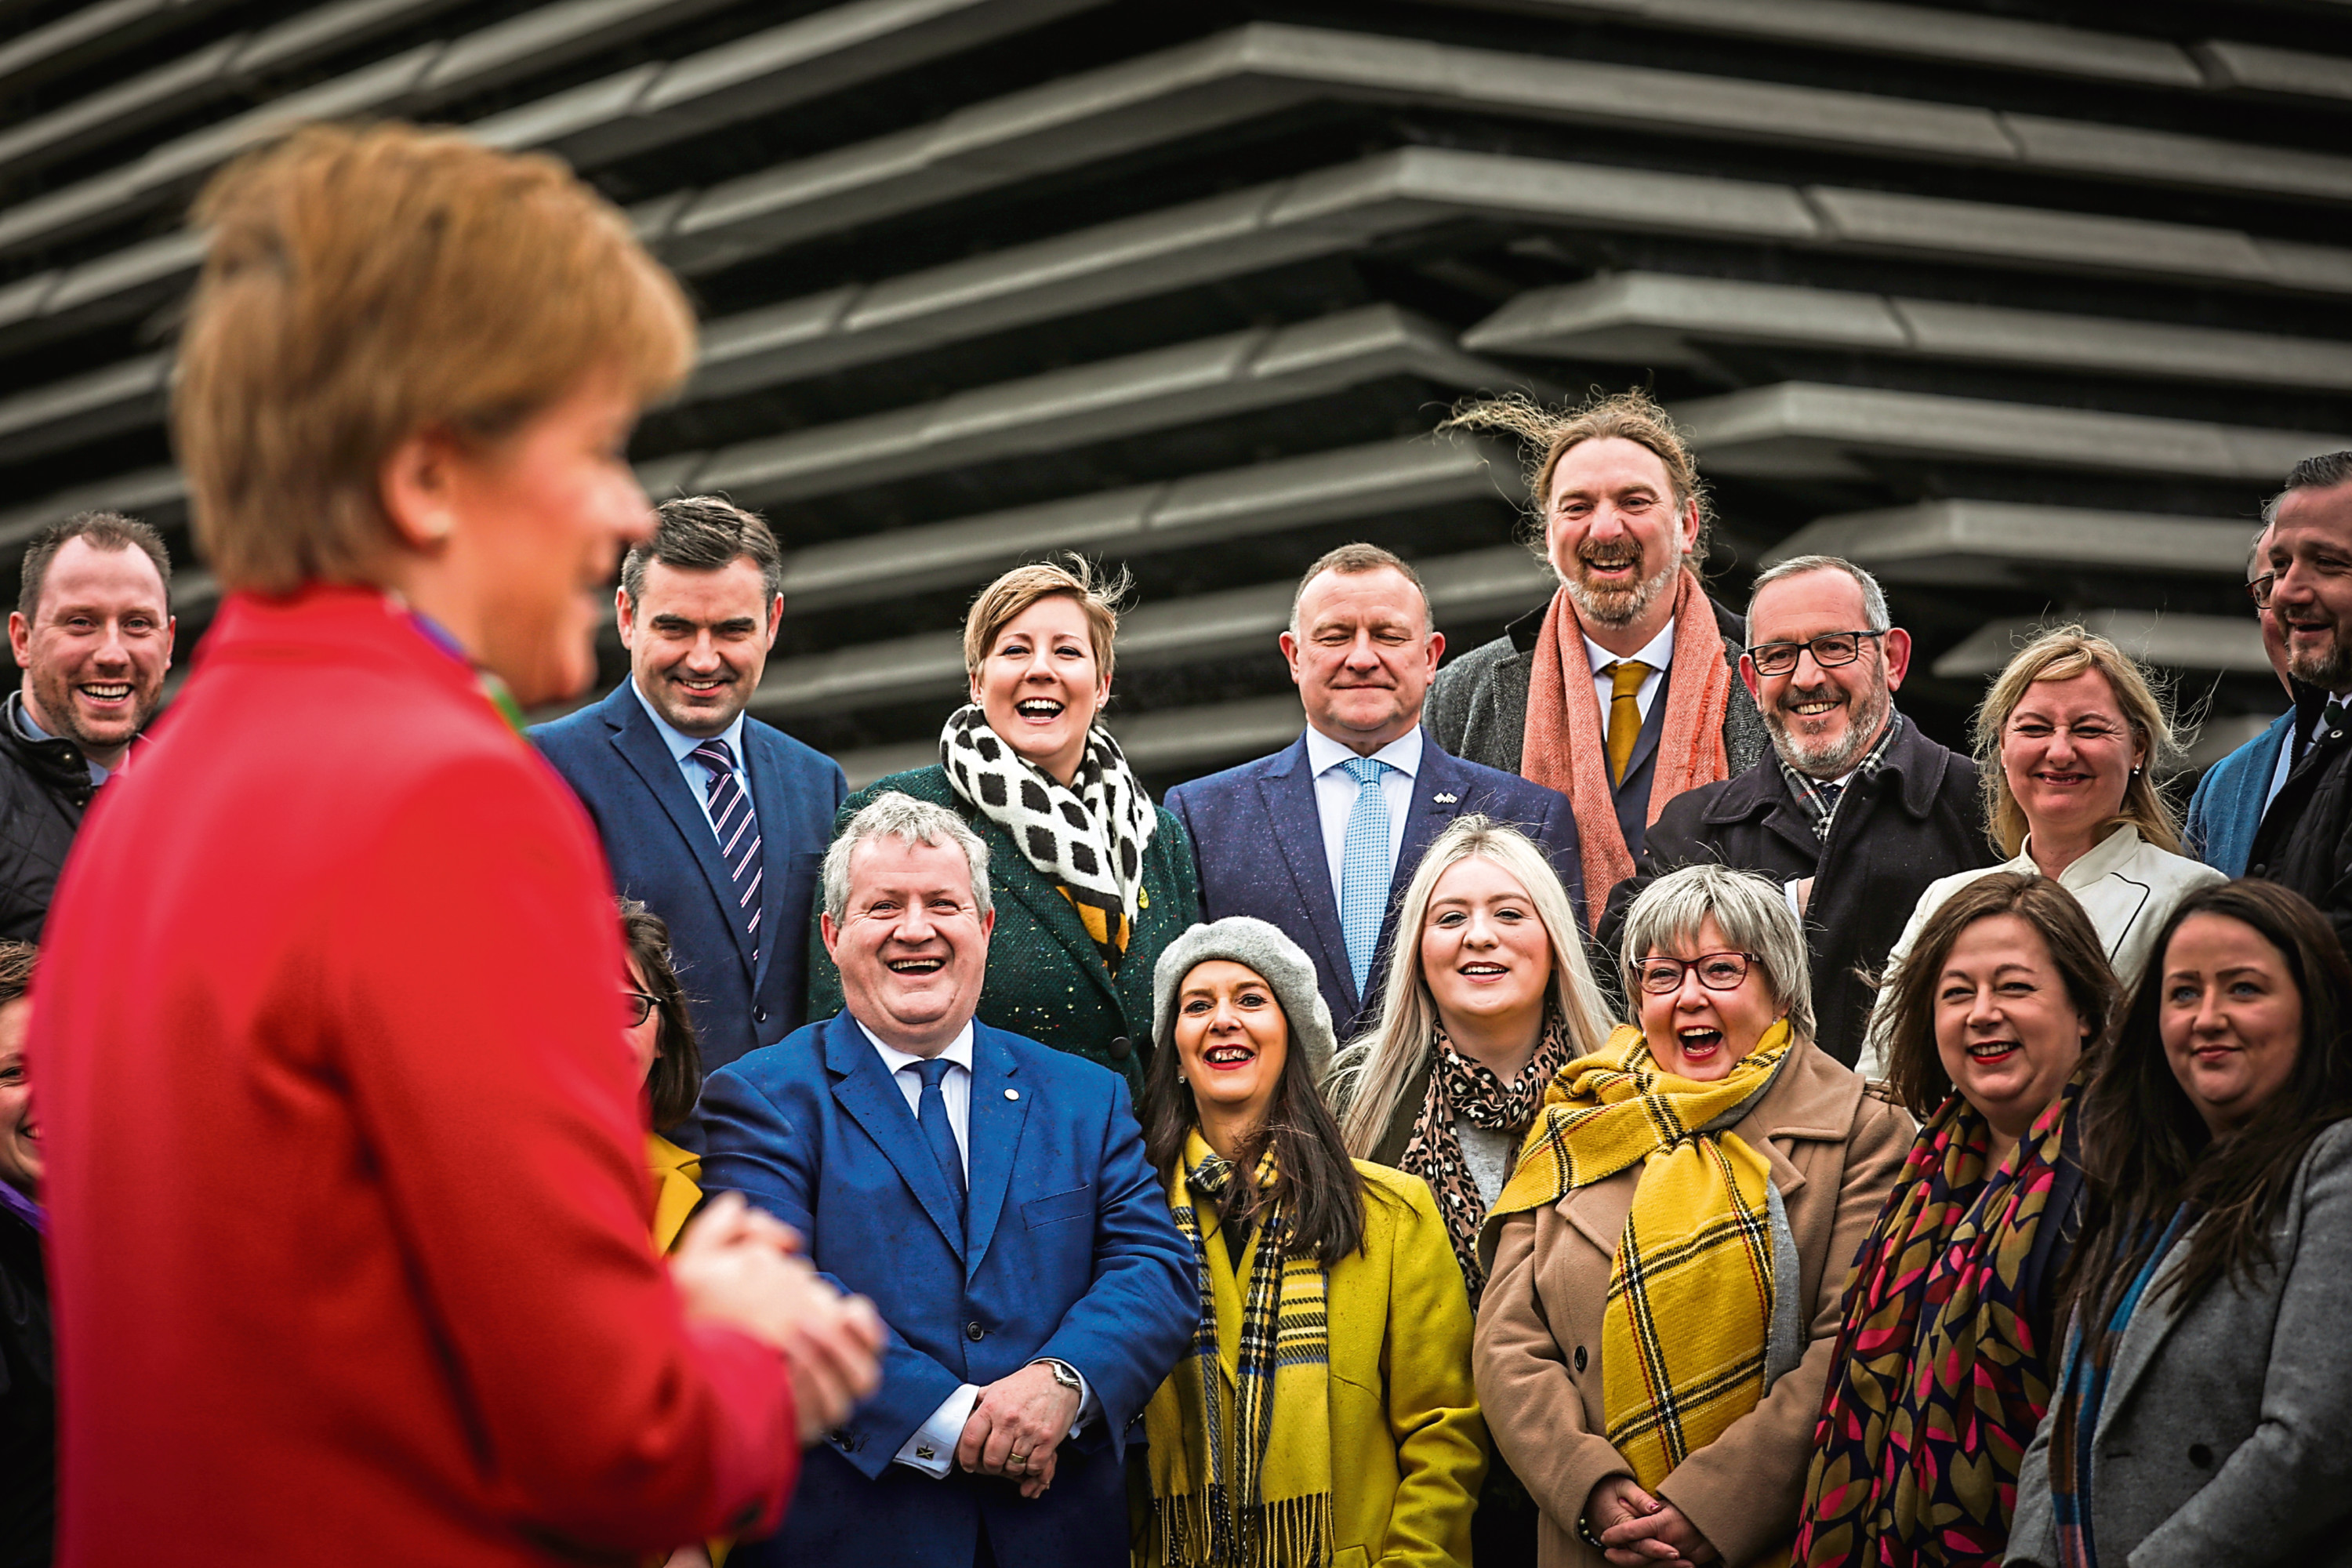 Nicola Sturgeon at V&A Dundee with Chris Law and Stewart Hosie to celebrate their election wins.